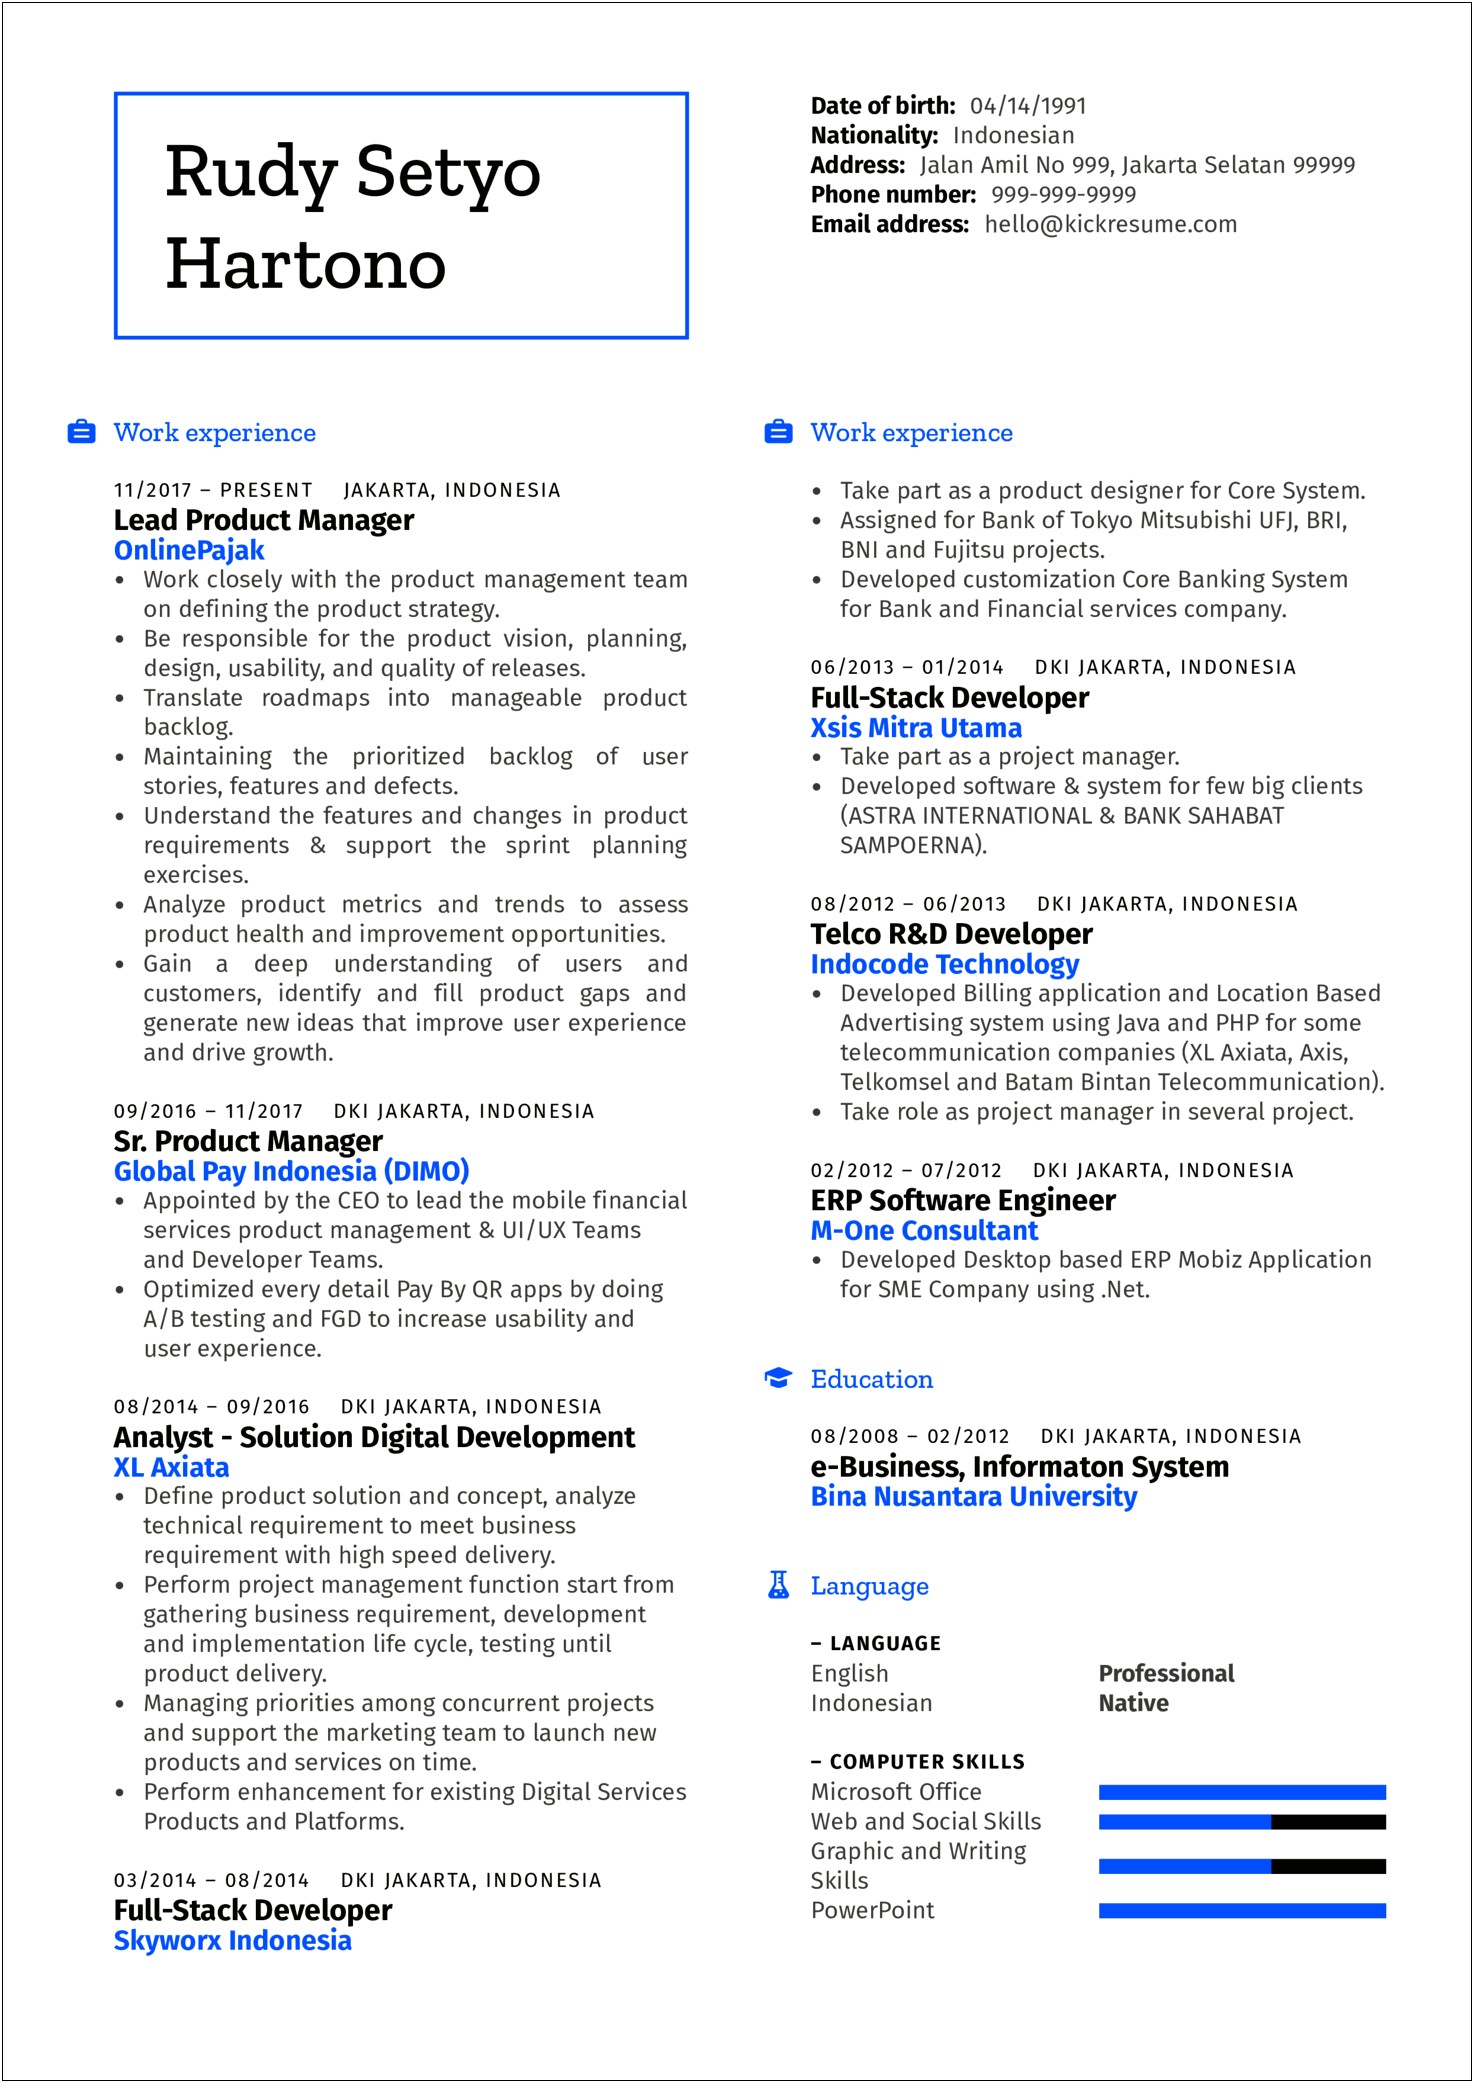 Contact Info Part Of A Resume Example